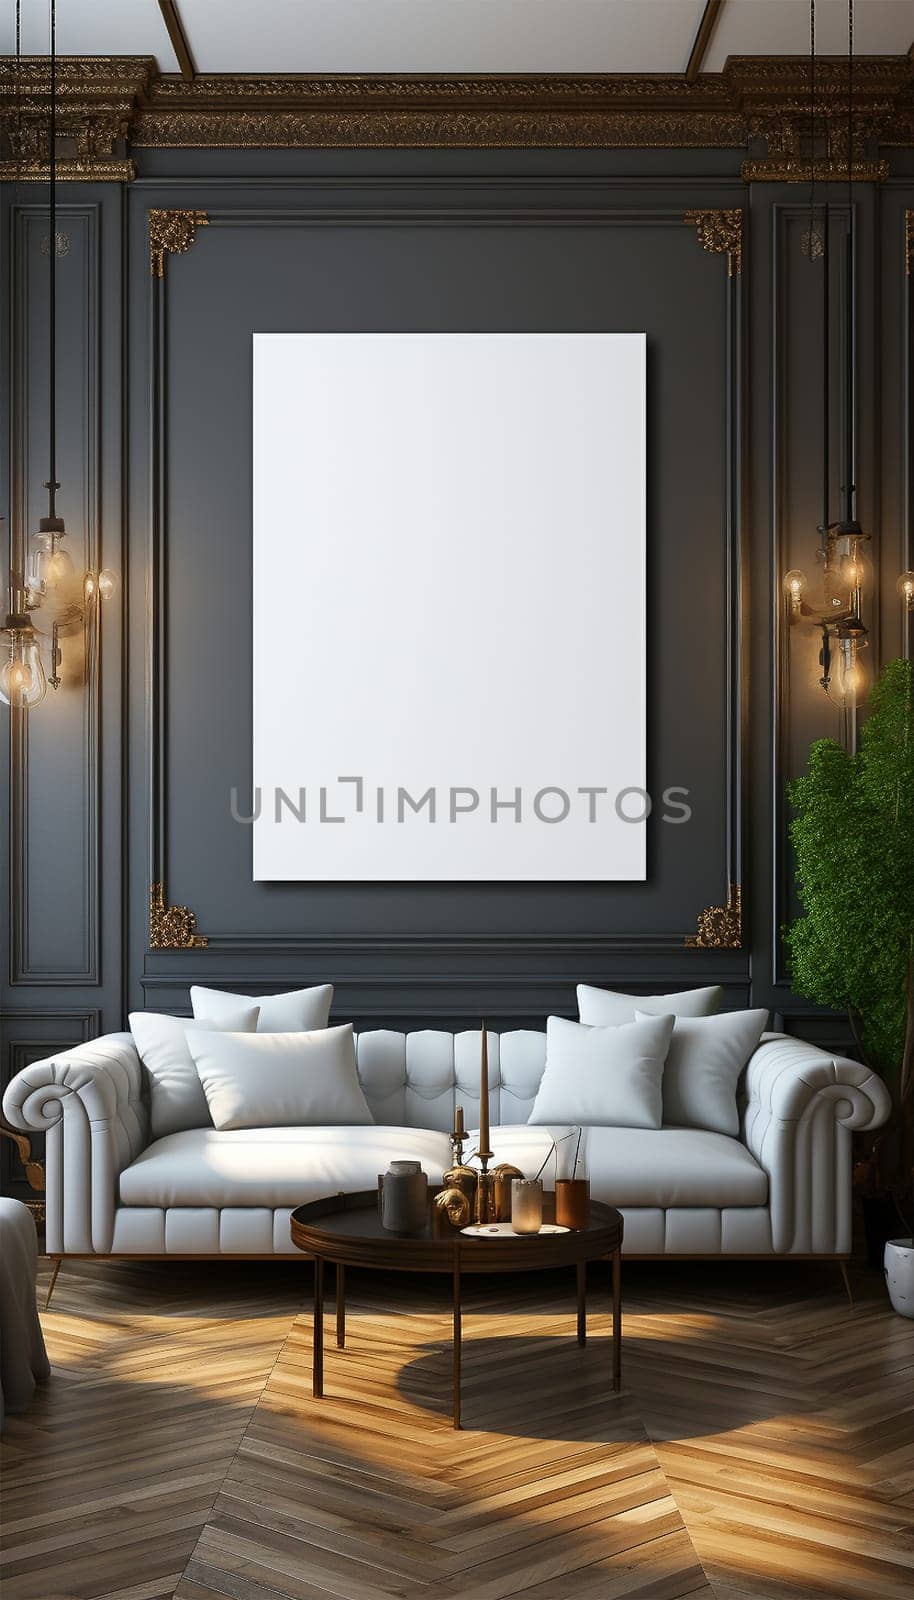 Sitting area Modern living room Mockup poster frame on the wall, a stylish sofa in Scandinavian Livingroom, 3d rendering, 3d illustration copy space. Stylish interior design Space for text